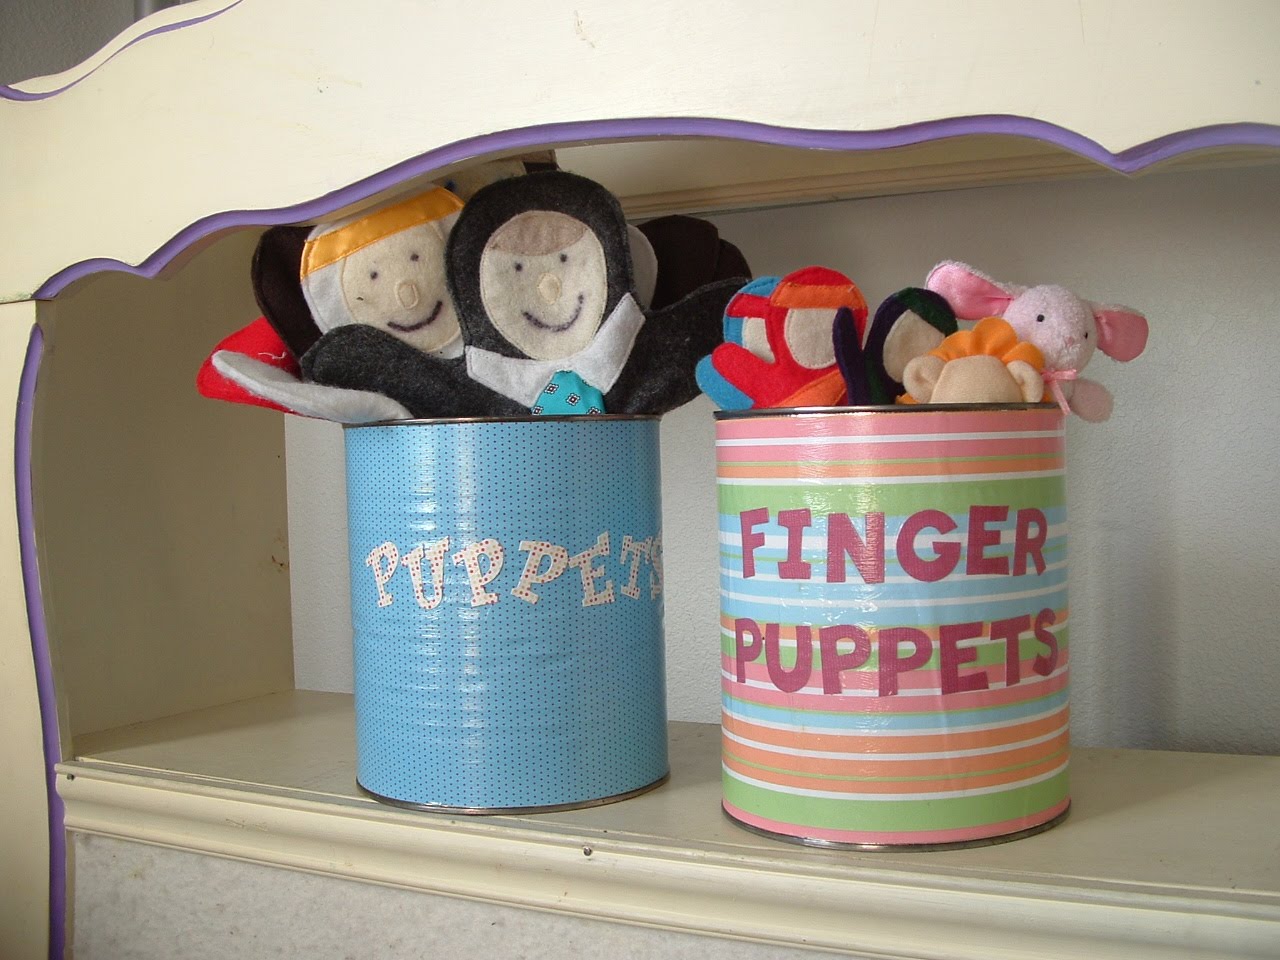 DIY Paint Brush Puppets + Puppet Theater for Kids!